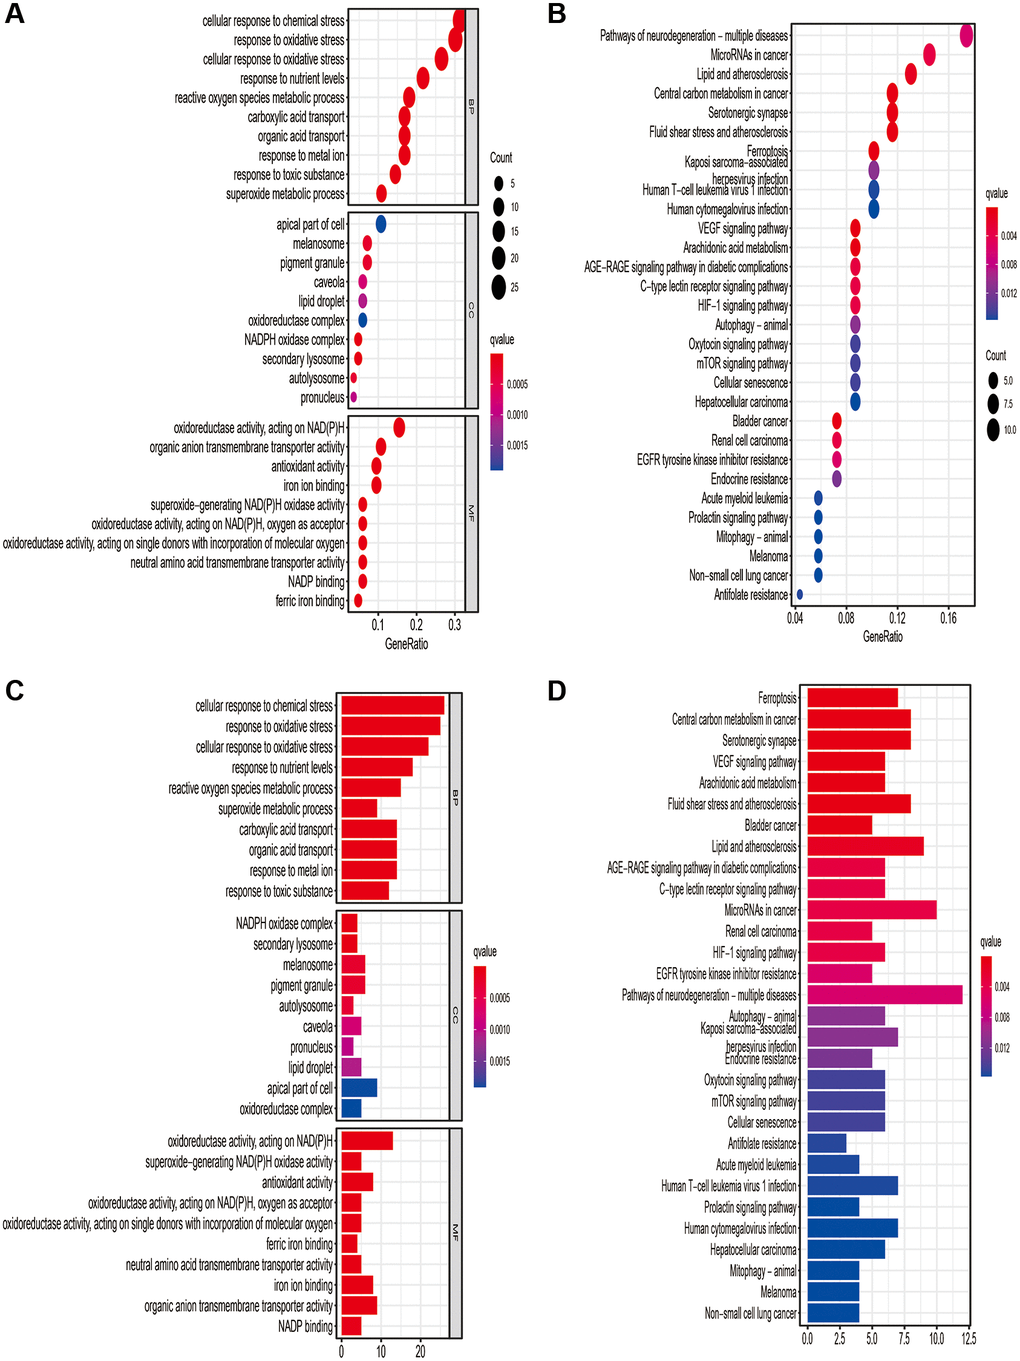 Results of Gene Ontology (GO) and Kyoto Encyclopedia of Genes and Genomes (KEGG) analyses. GO (A, B) and KEGG (C, D) analysis based on the ferroptosis-related differentially expressed genes.